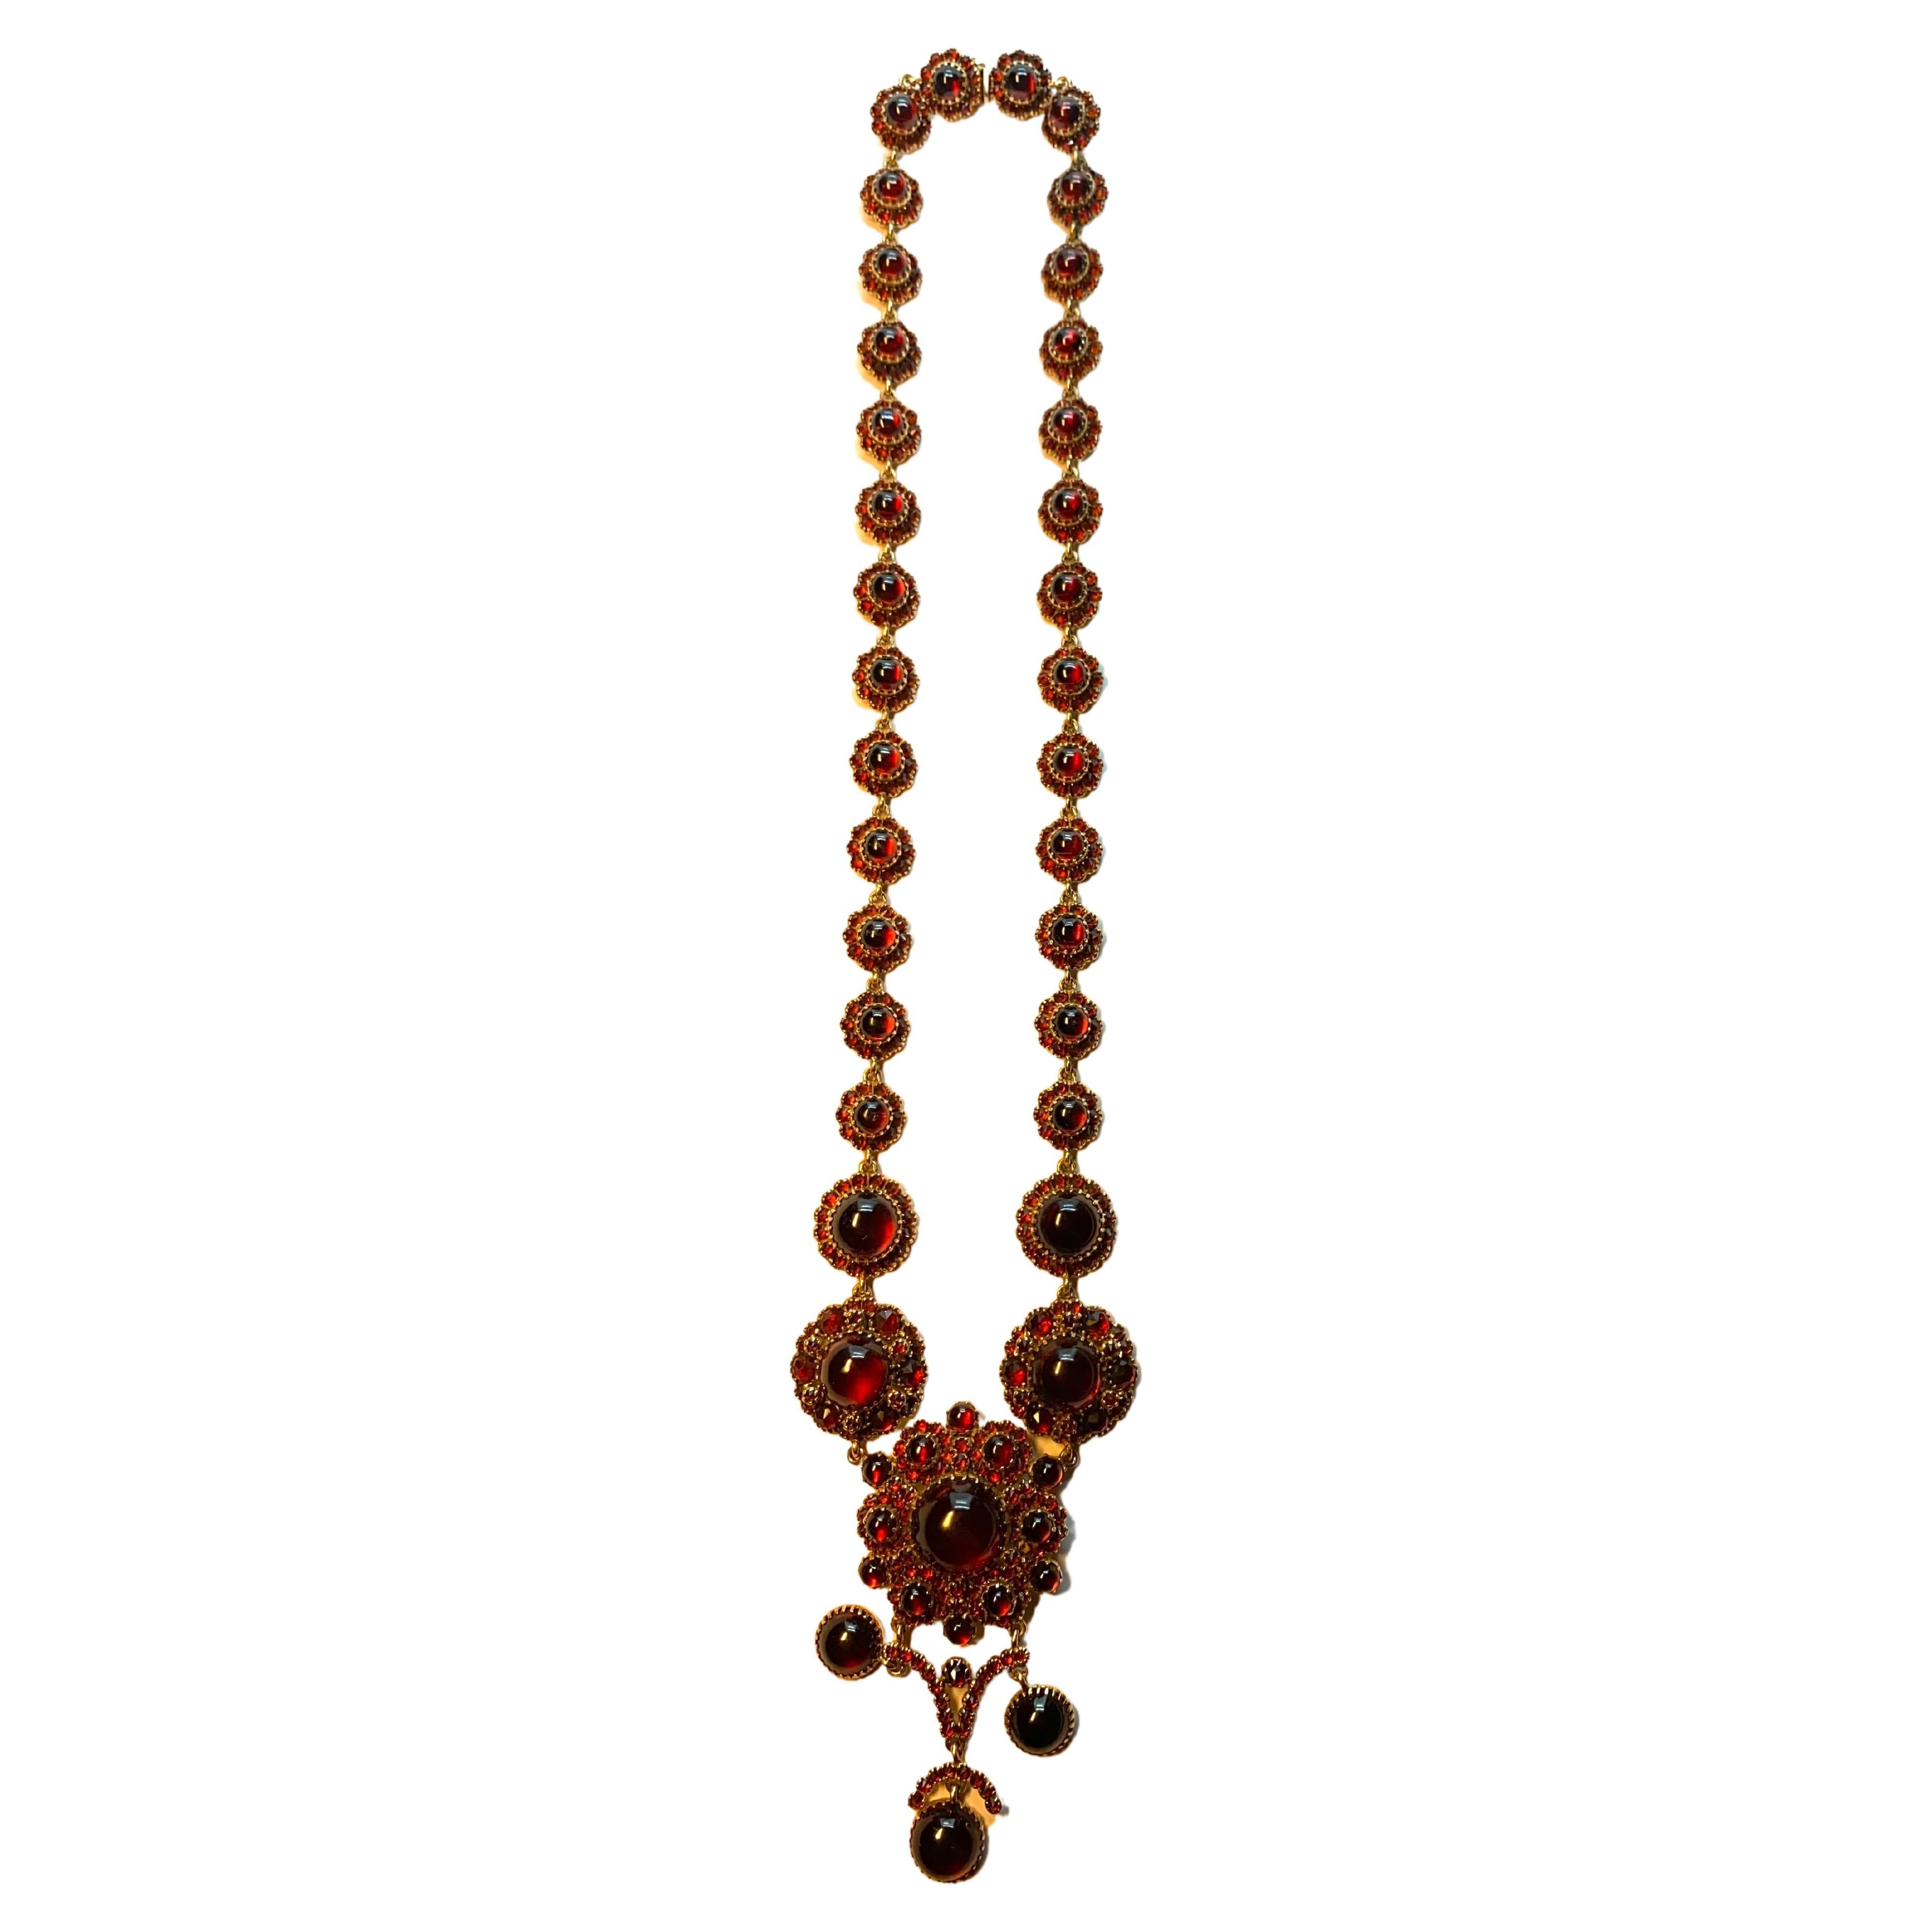 Fabulous Bohemian garnet necklace, handcrafted in 14K gold.
Mid 20th century production
Austro-Hungarian style
Perfect conditions